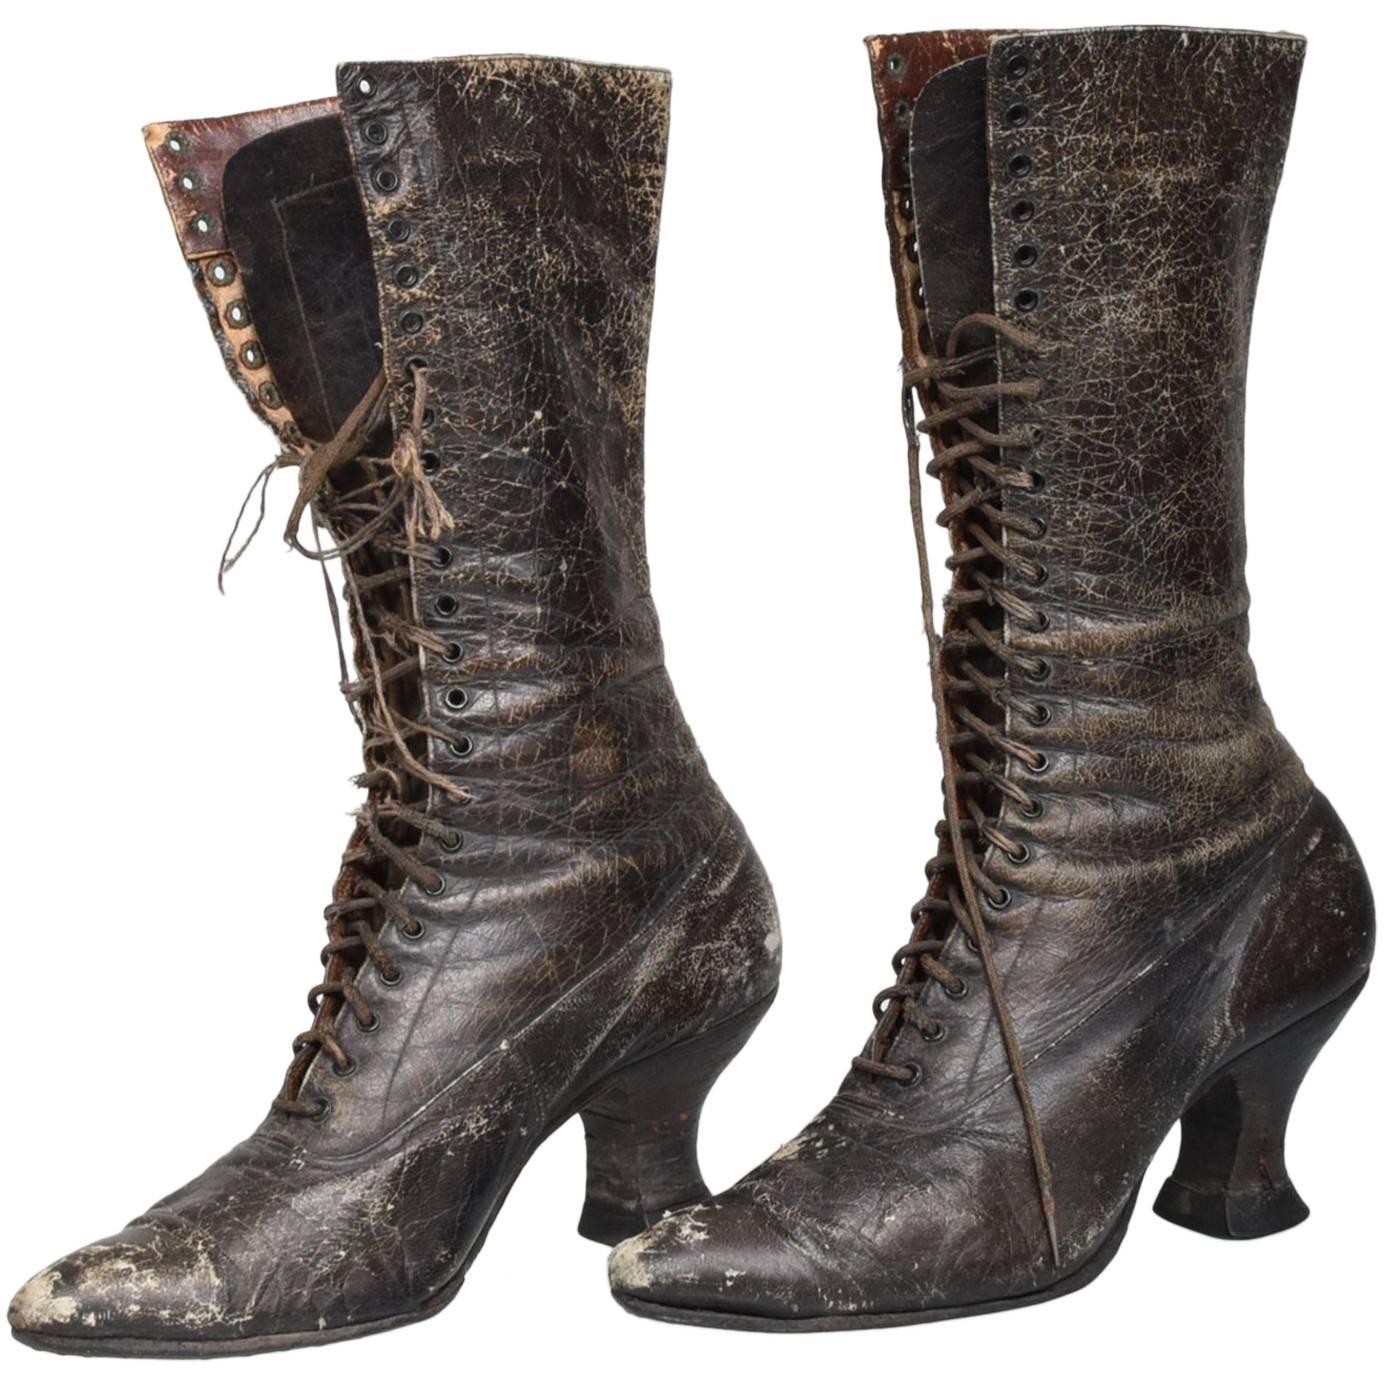 Pair of Ladies Victorian High-Top Leather Boots